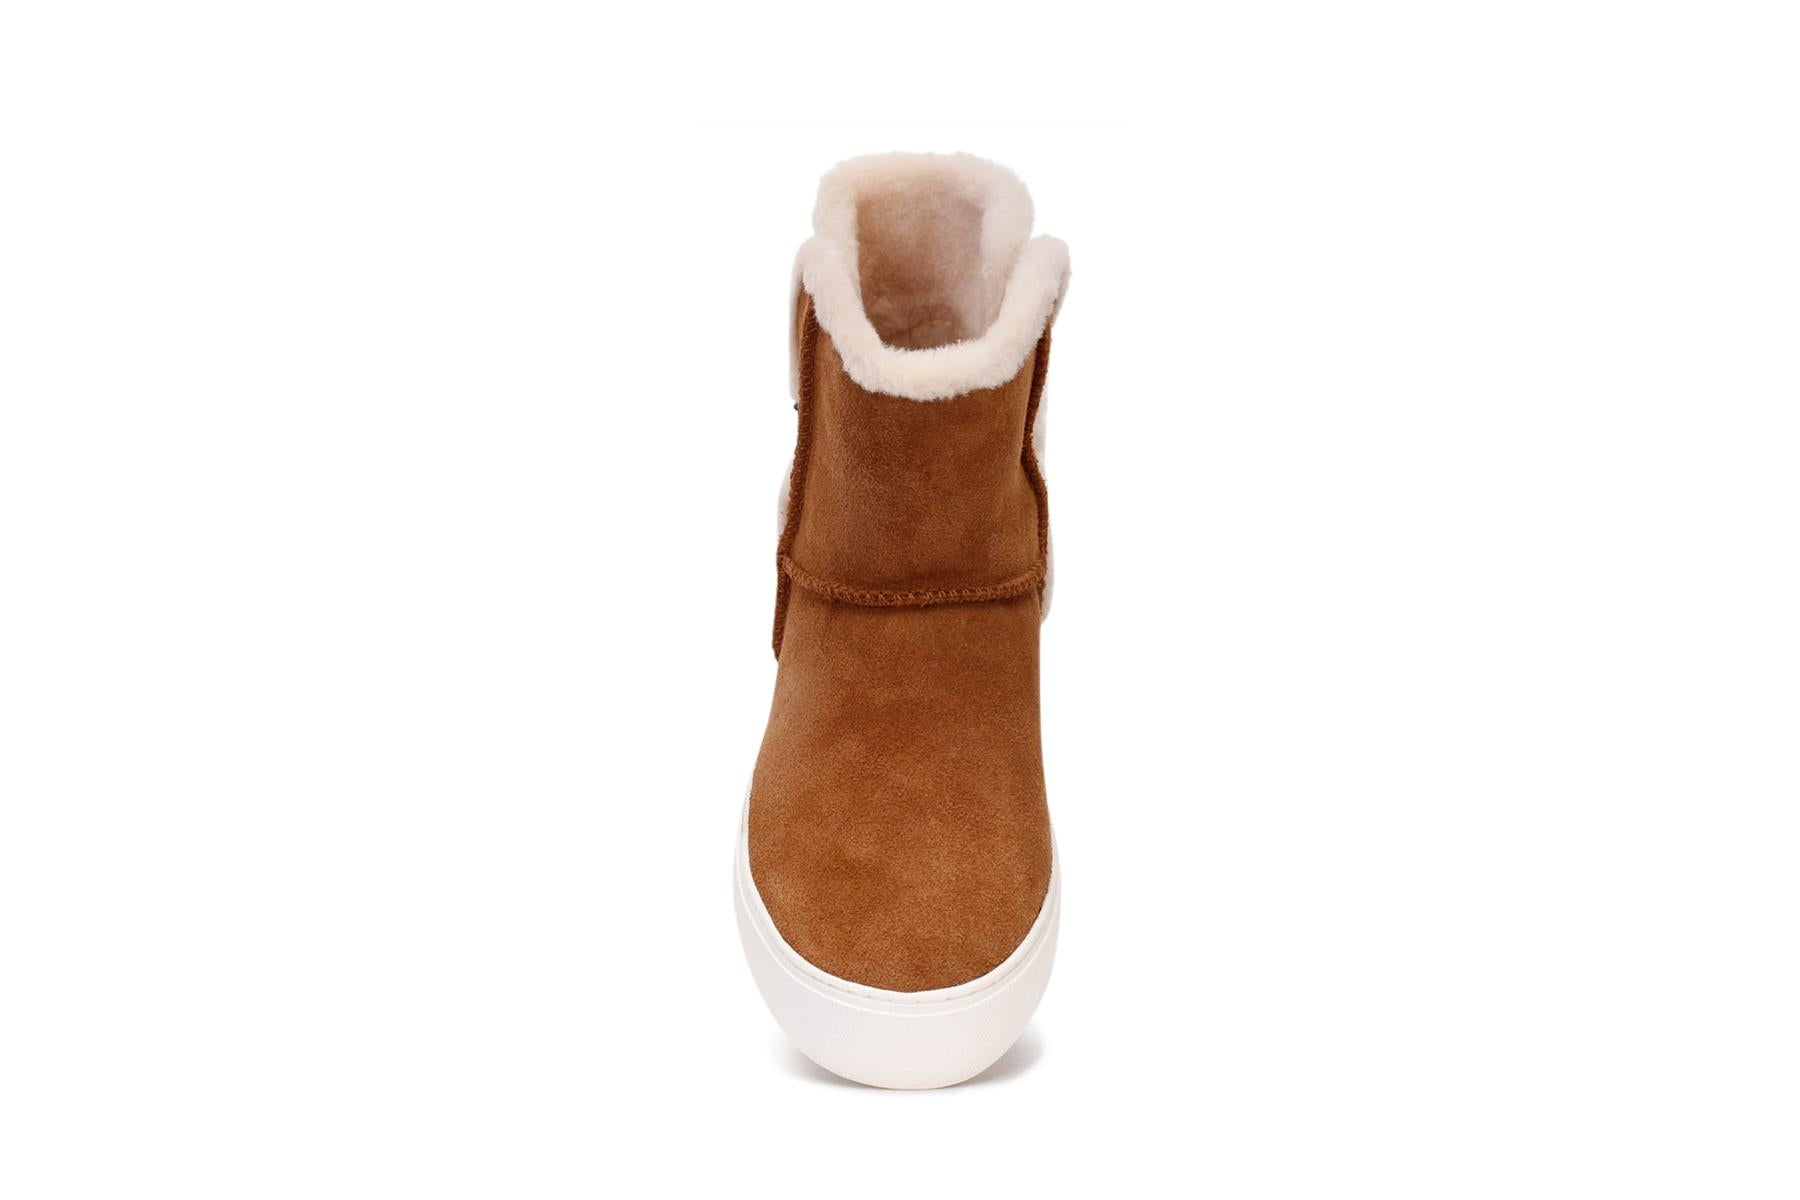 UGG Aika in Chestnut Women's Boots Size 11 Brown/White 1104069 